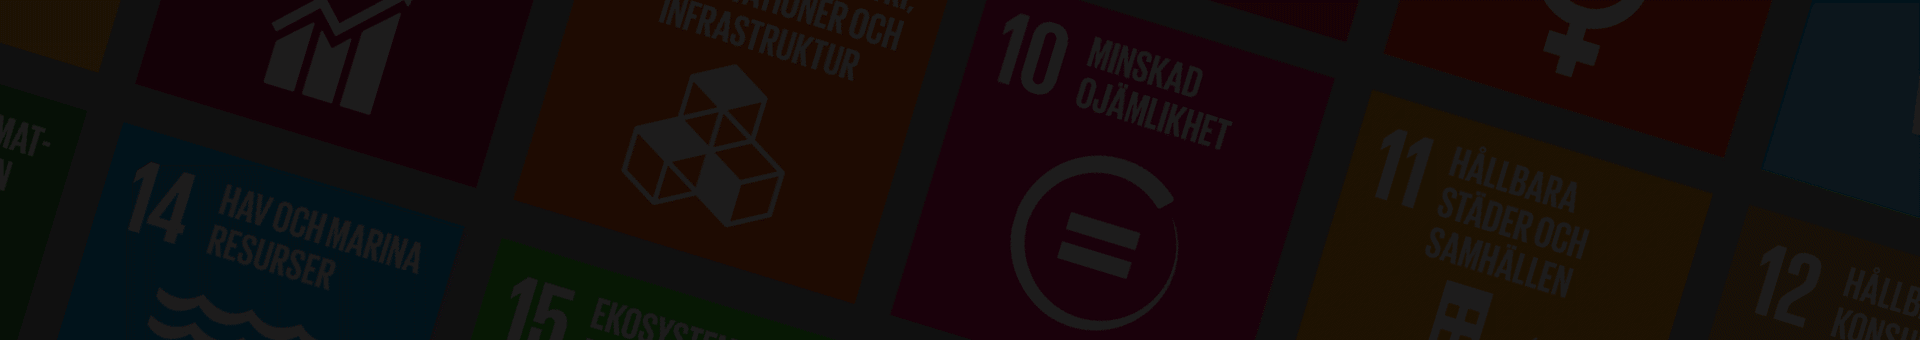 Targetaid Sdgs Background 1920X340 Tp